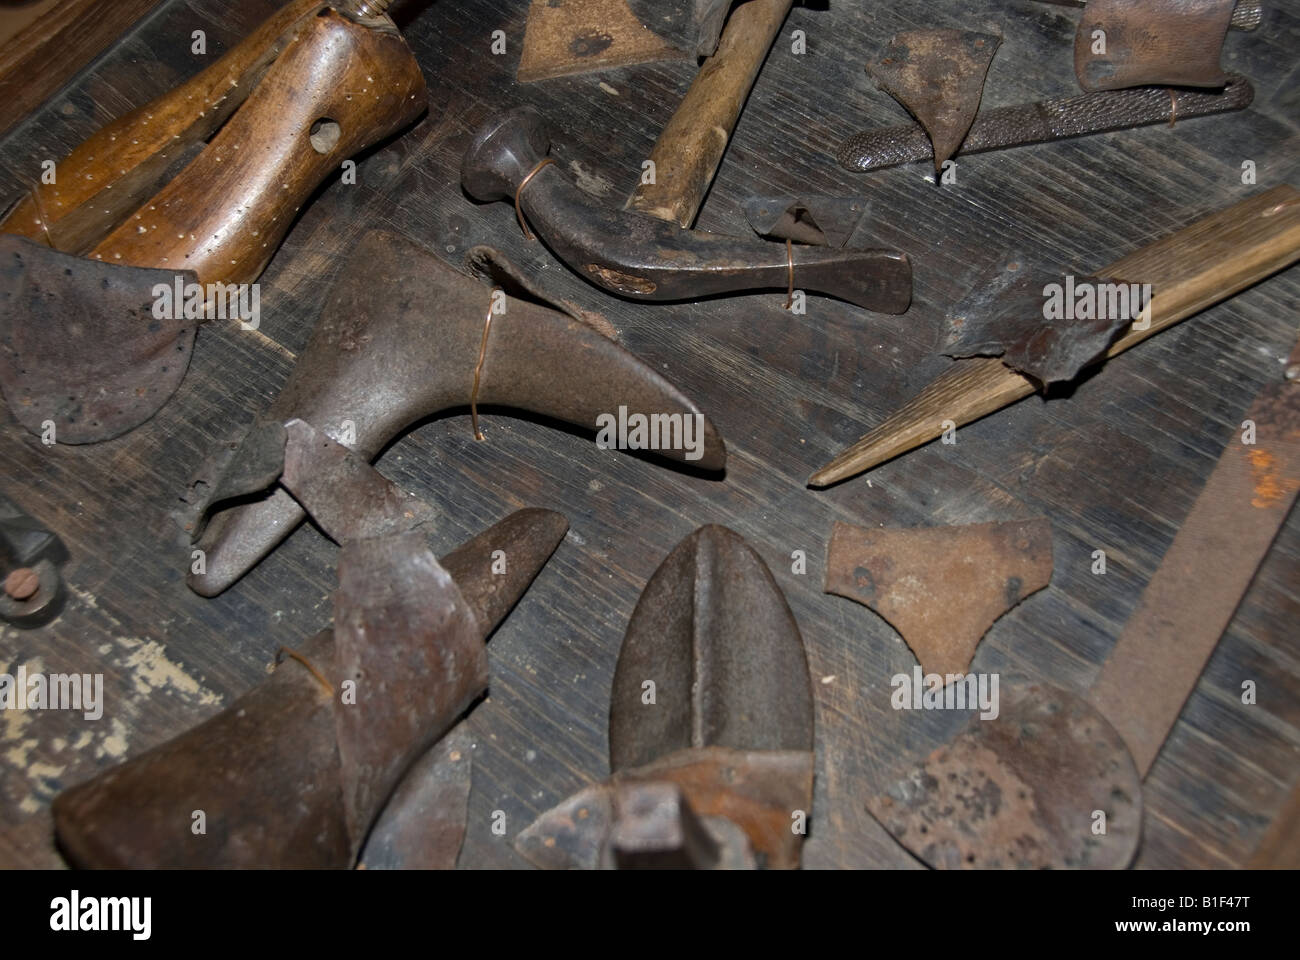 Stock photo of various old tools used to make shoes and boots in the village of Montrol Senard Stock Photo